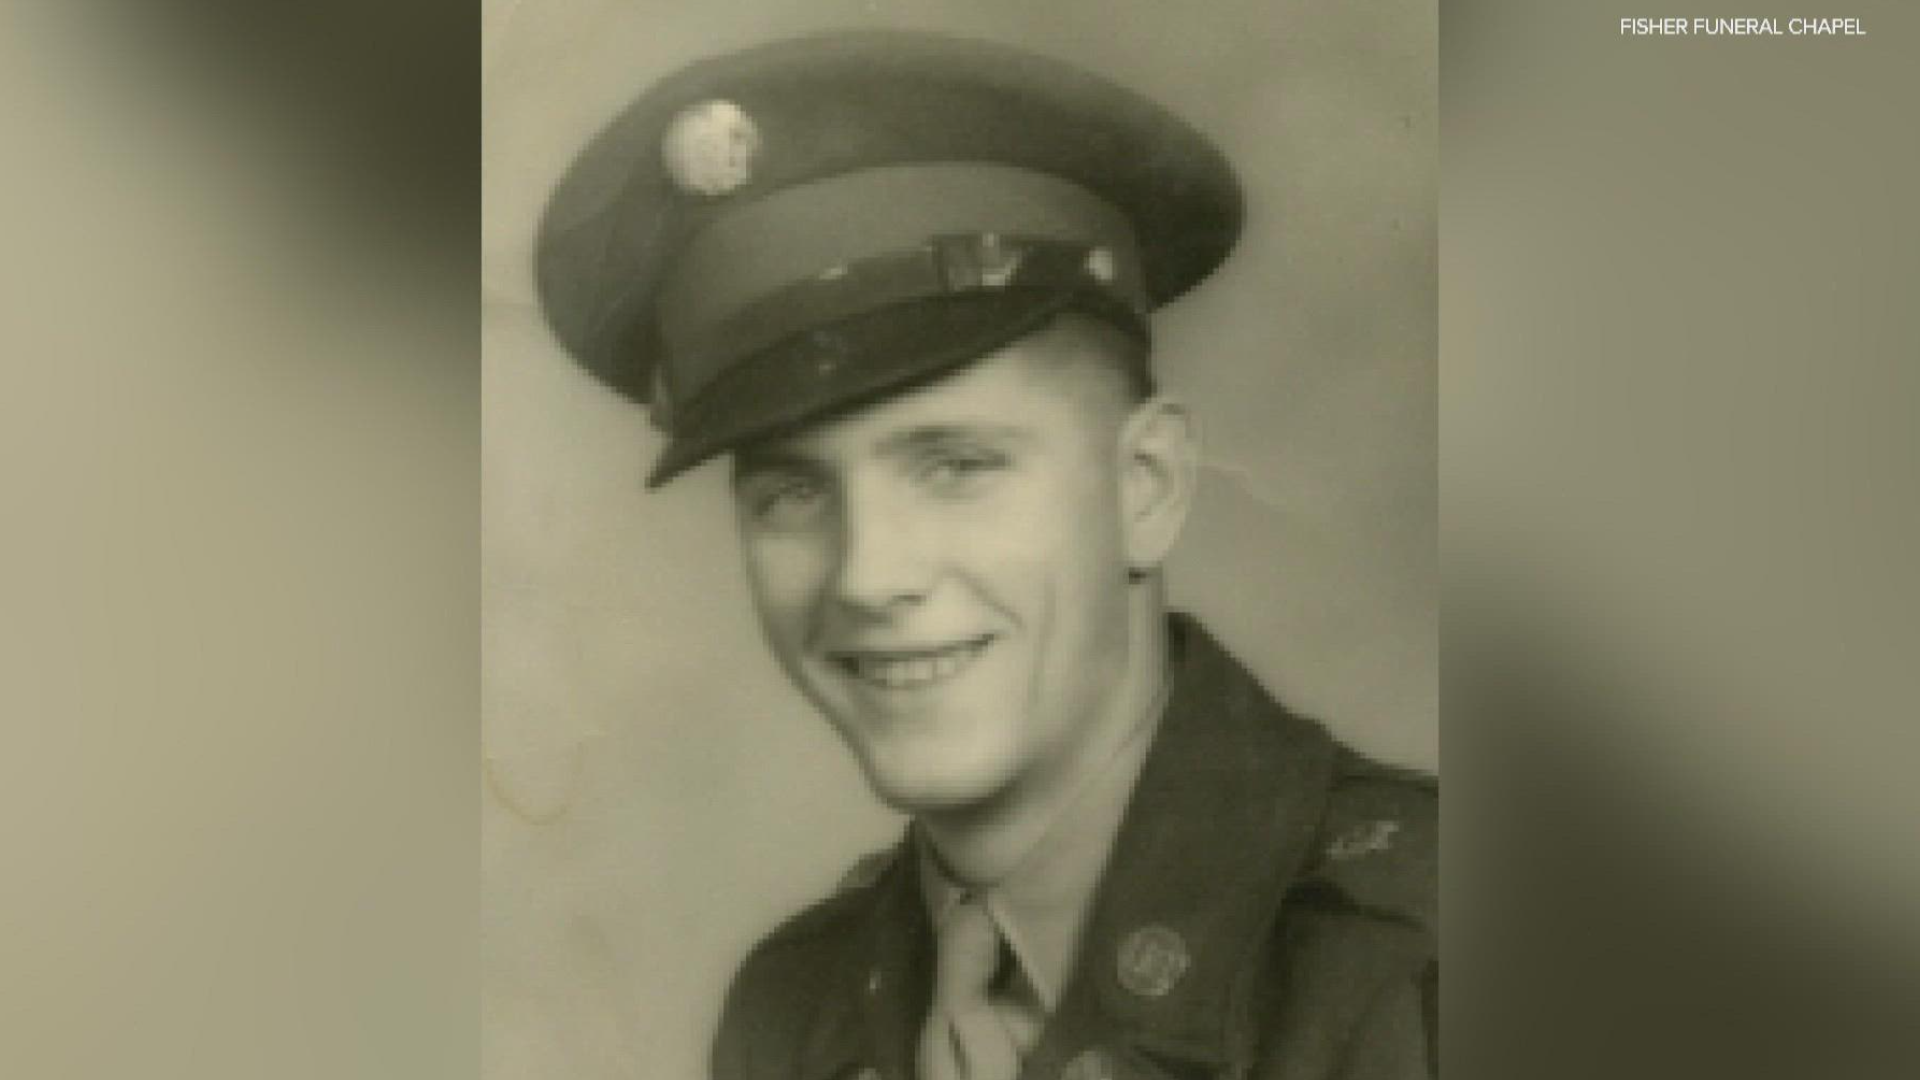 The remains of a fallen "Hoosier hero" are finally returning to Indiana seven decades later.